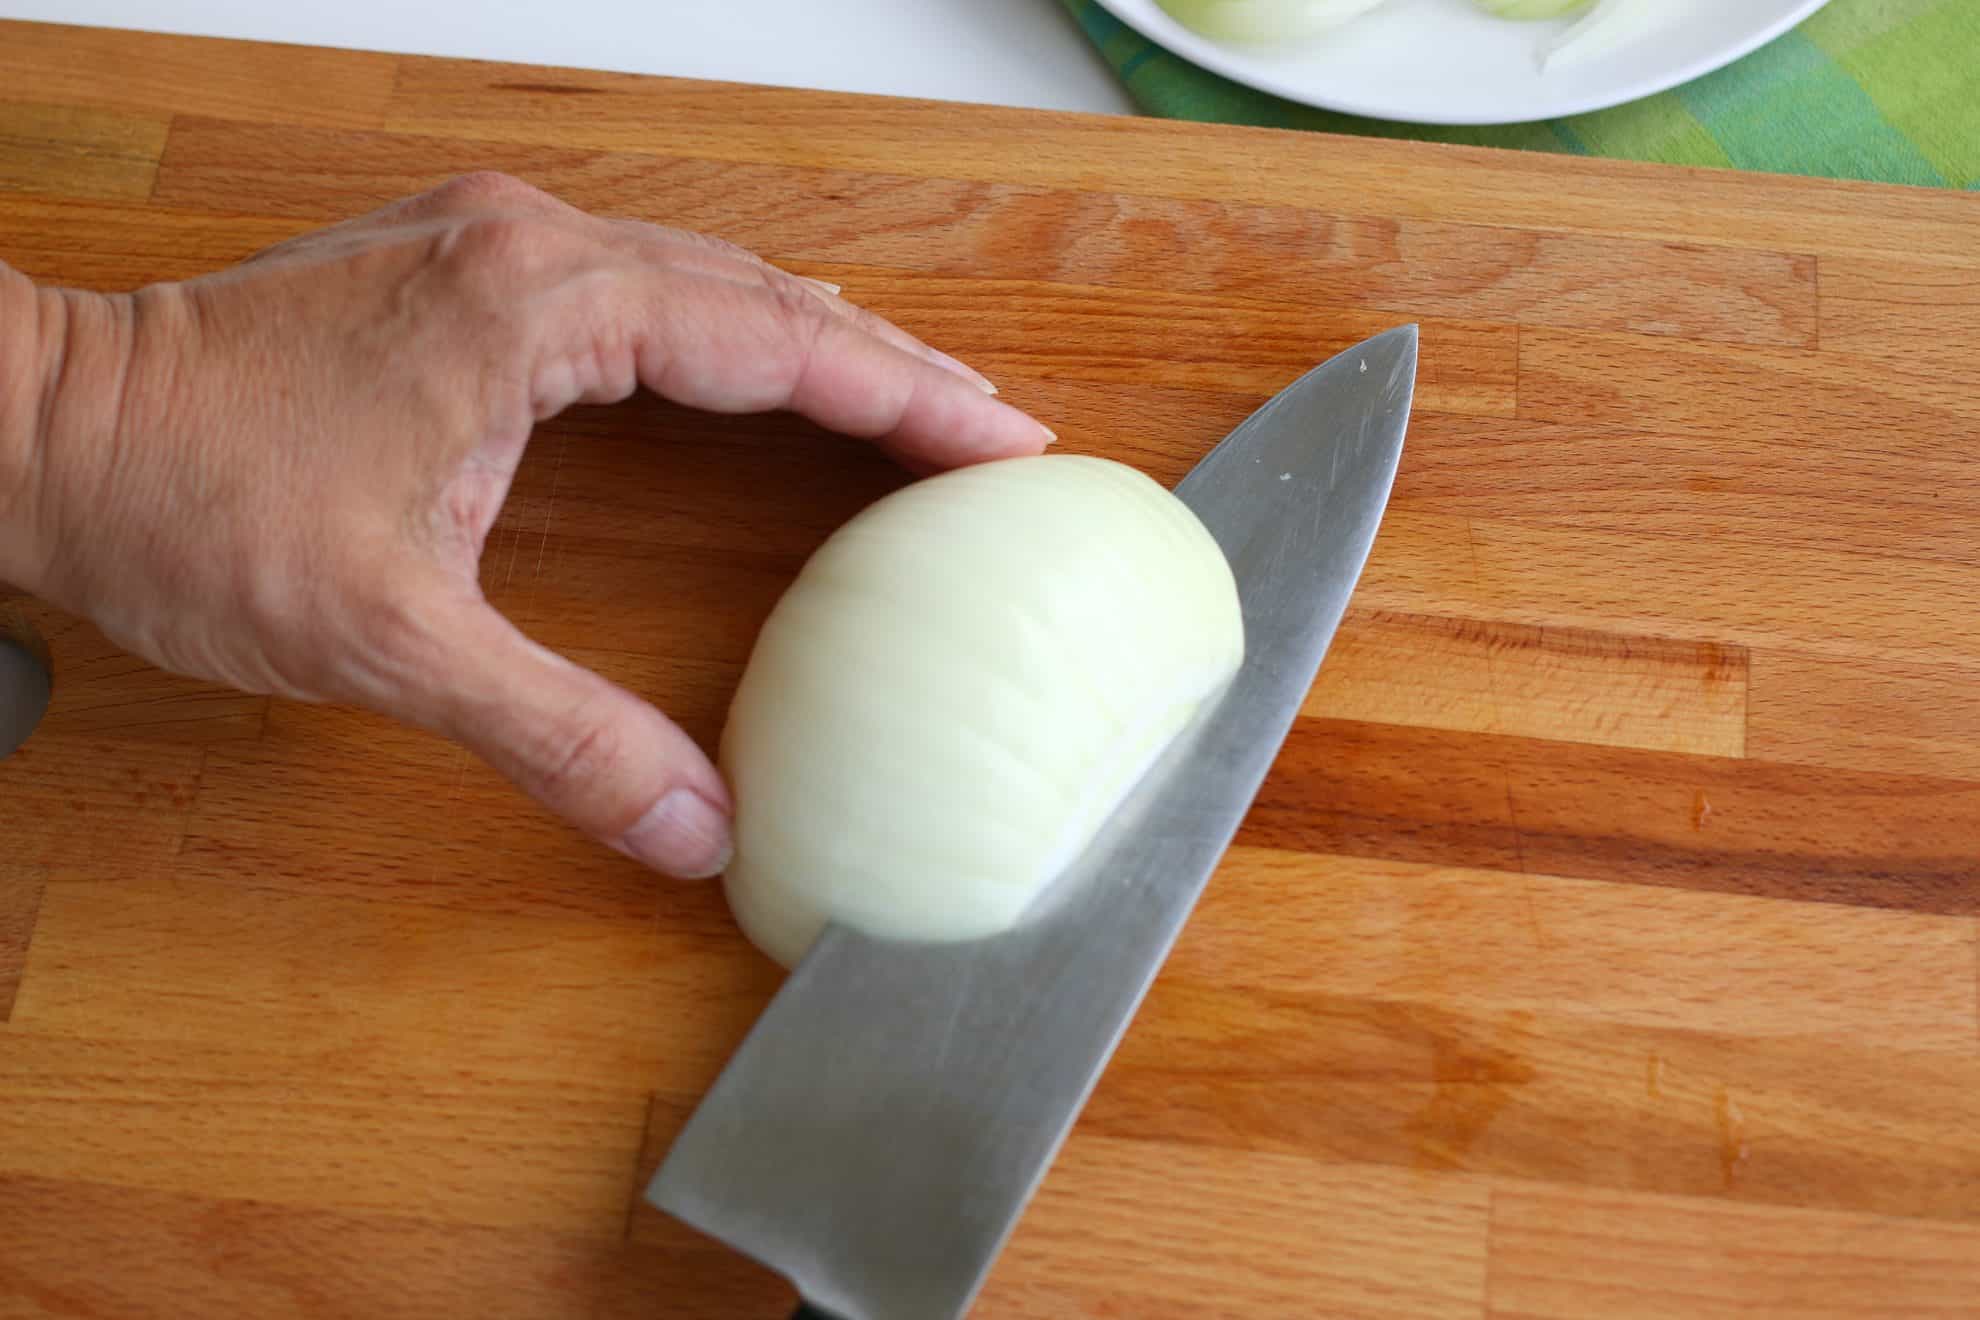 Slicing an onion to dice begins with horizontal cuts.